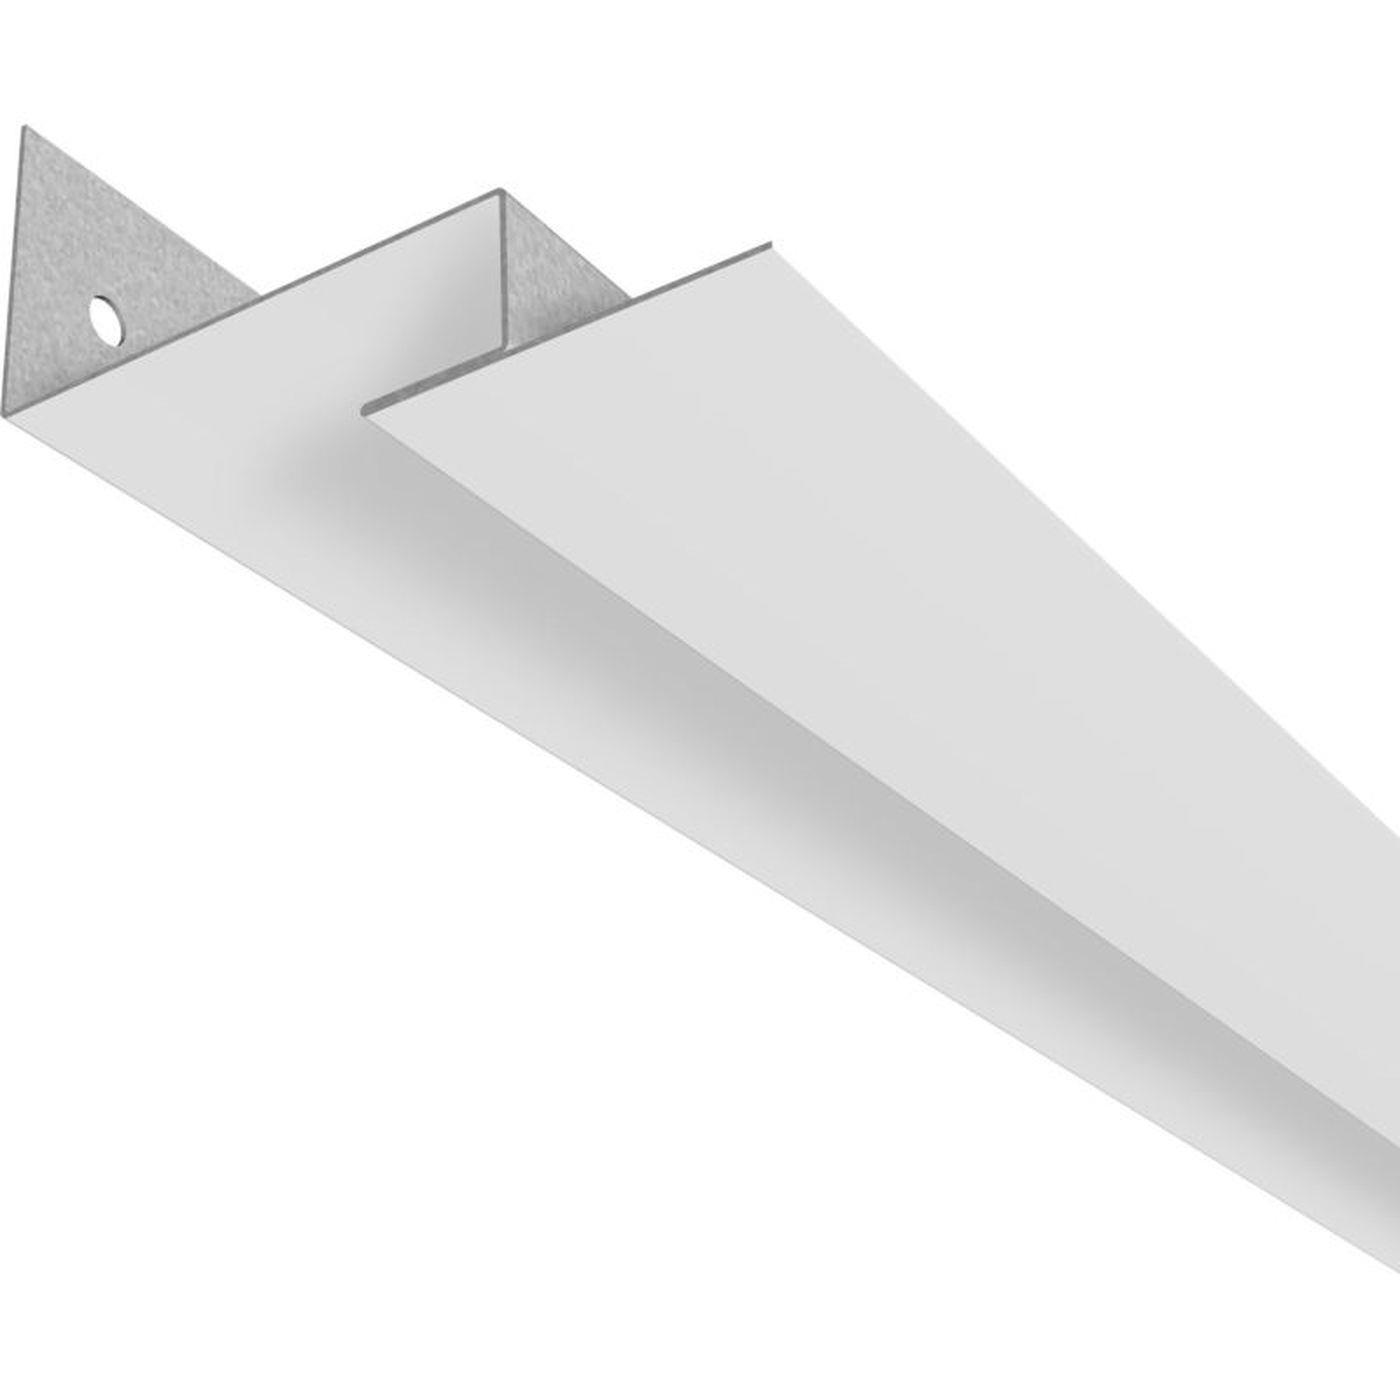 2m LED Drywall profile WRD-40 for installation in suspended grid ceiling systems Steel Zinc sheet